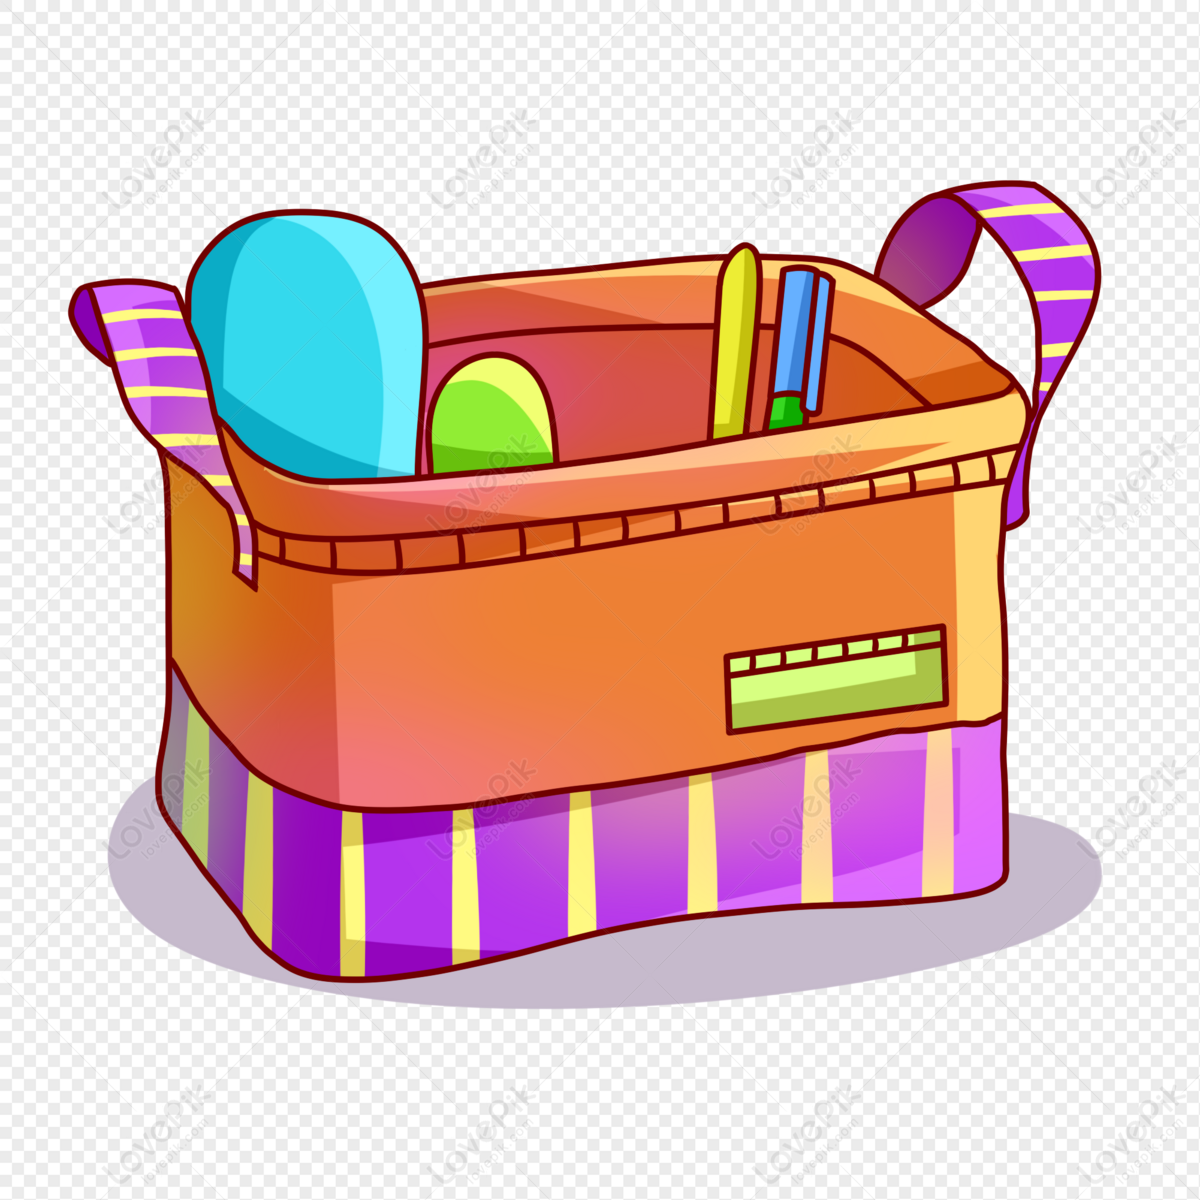 Cartoon Storage Box PNG Transparent Background And Clipart Image For Free  Download - Lovepik | 401486050